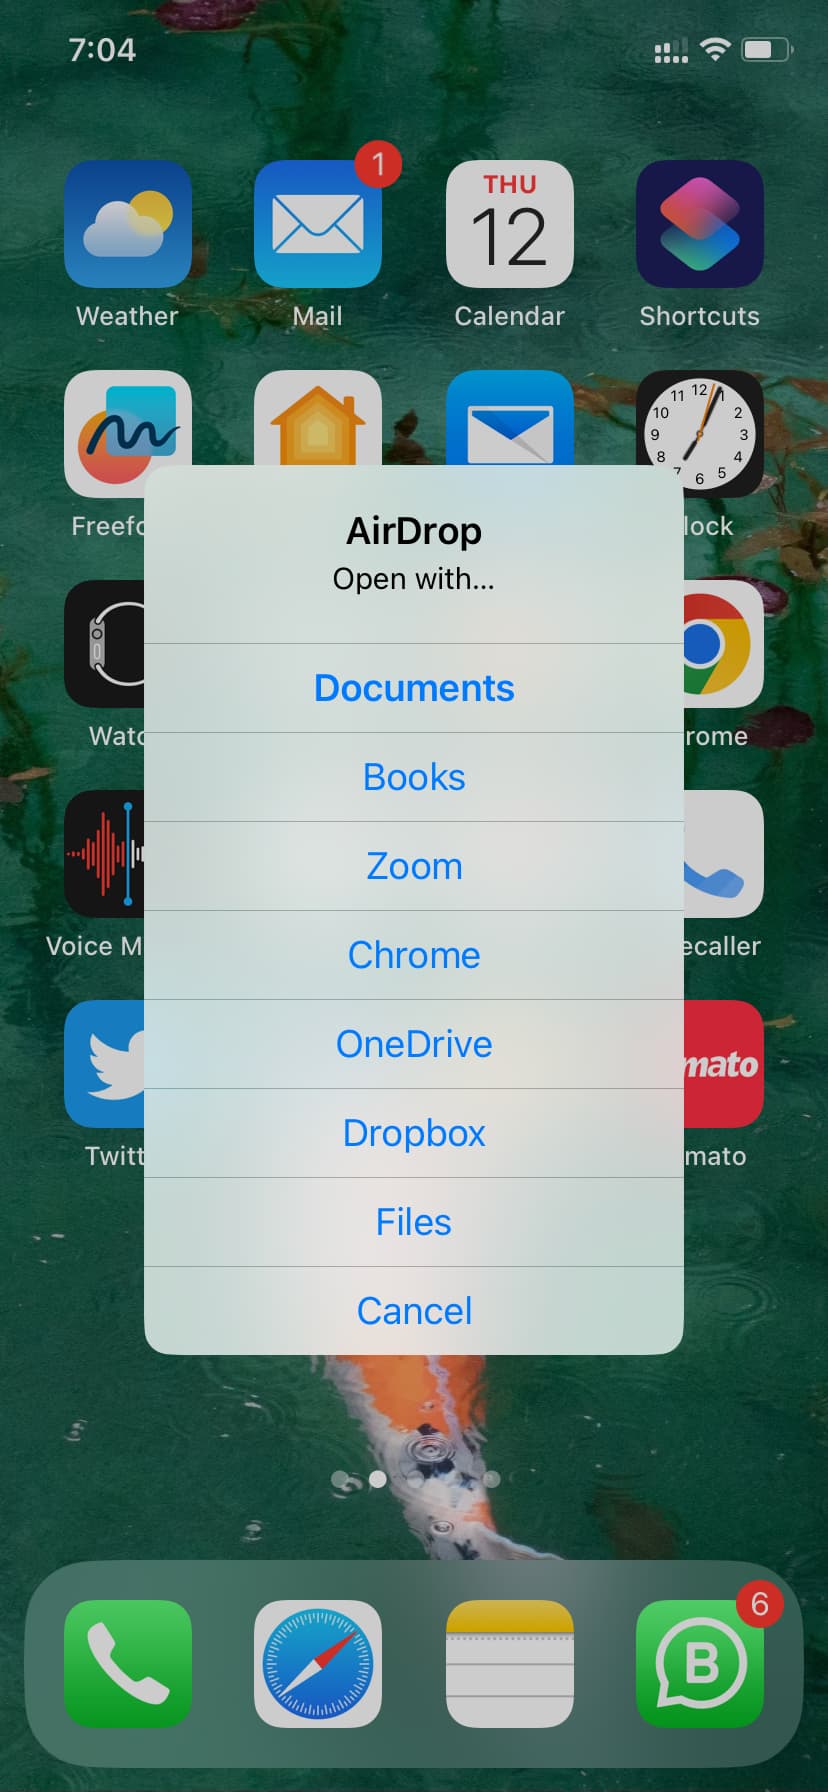 AirDrop popup alert to choose app to open file